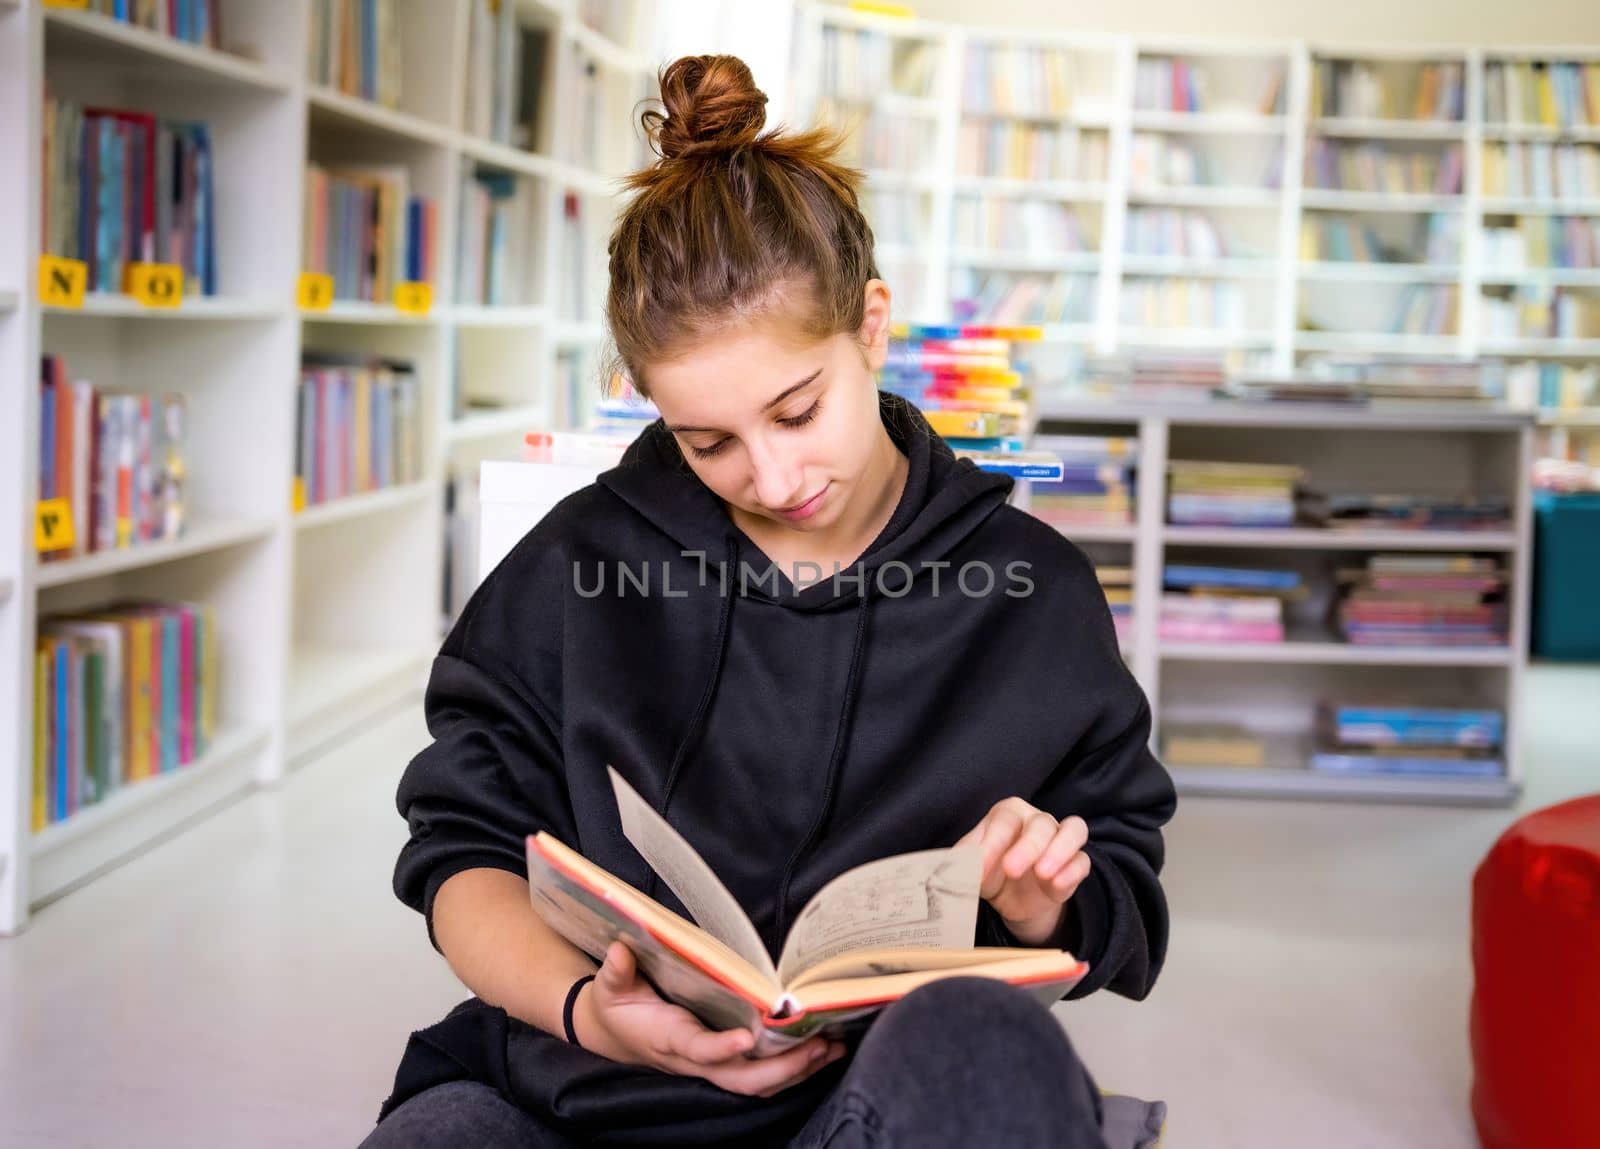 Student reading book in library leaning against bookshelves at the university